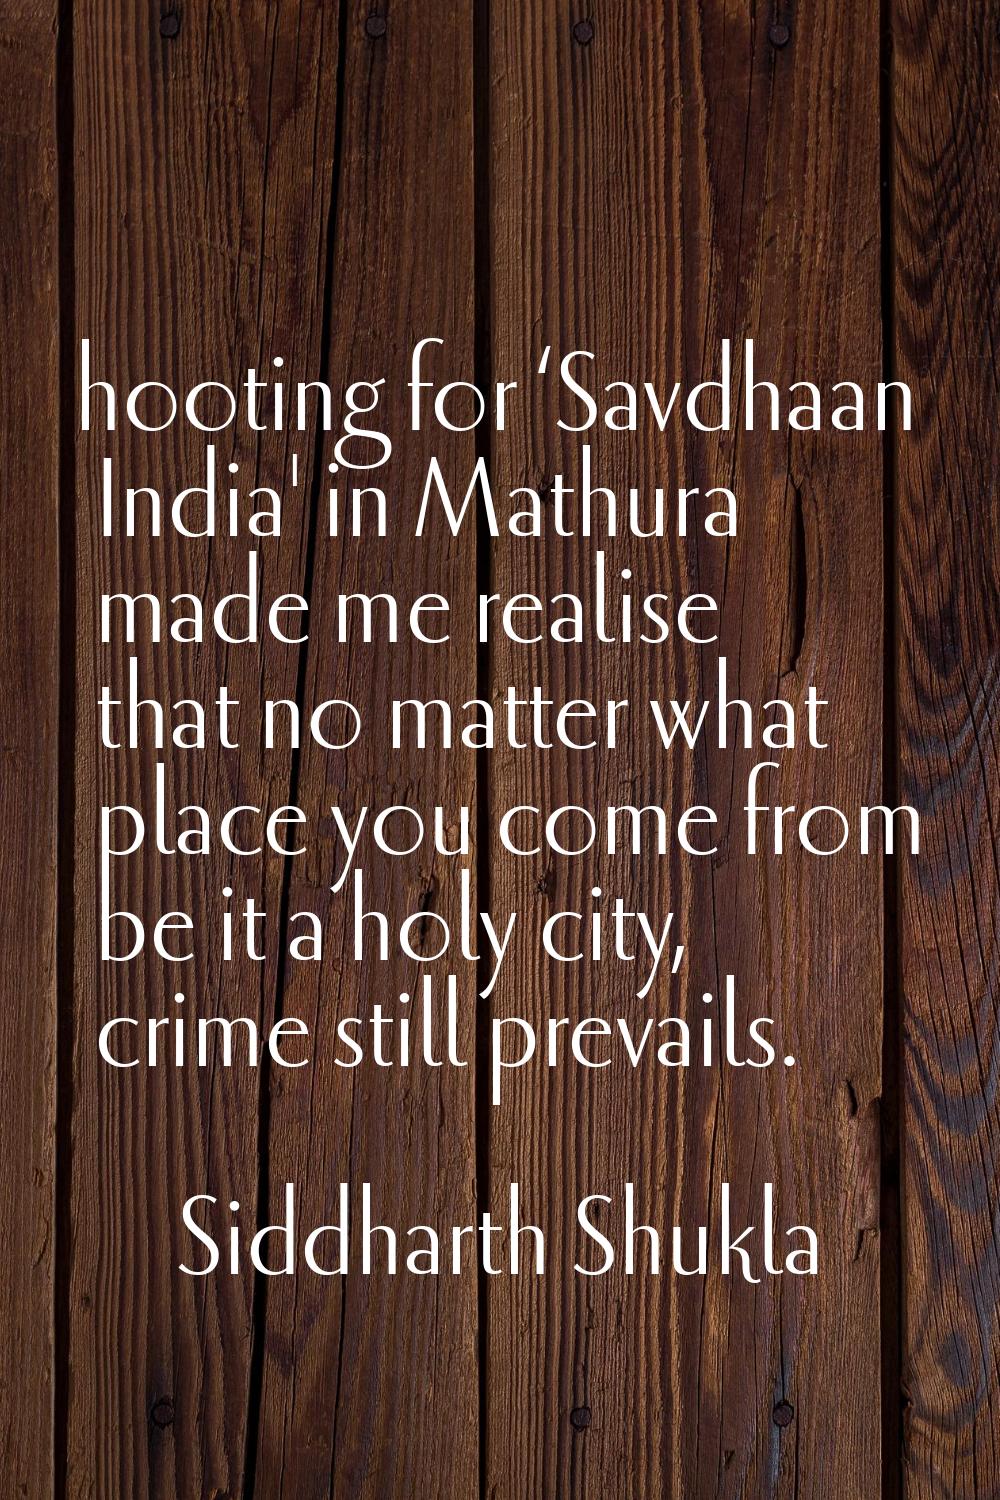 hooting for ‘Savdhaan India' in Mathura made me realise that no matter what place you come from be 